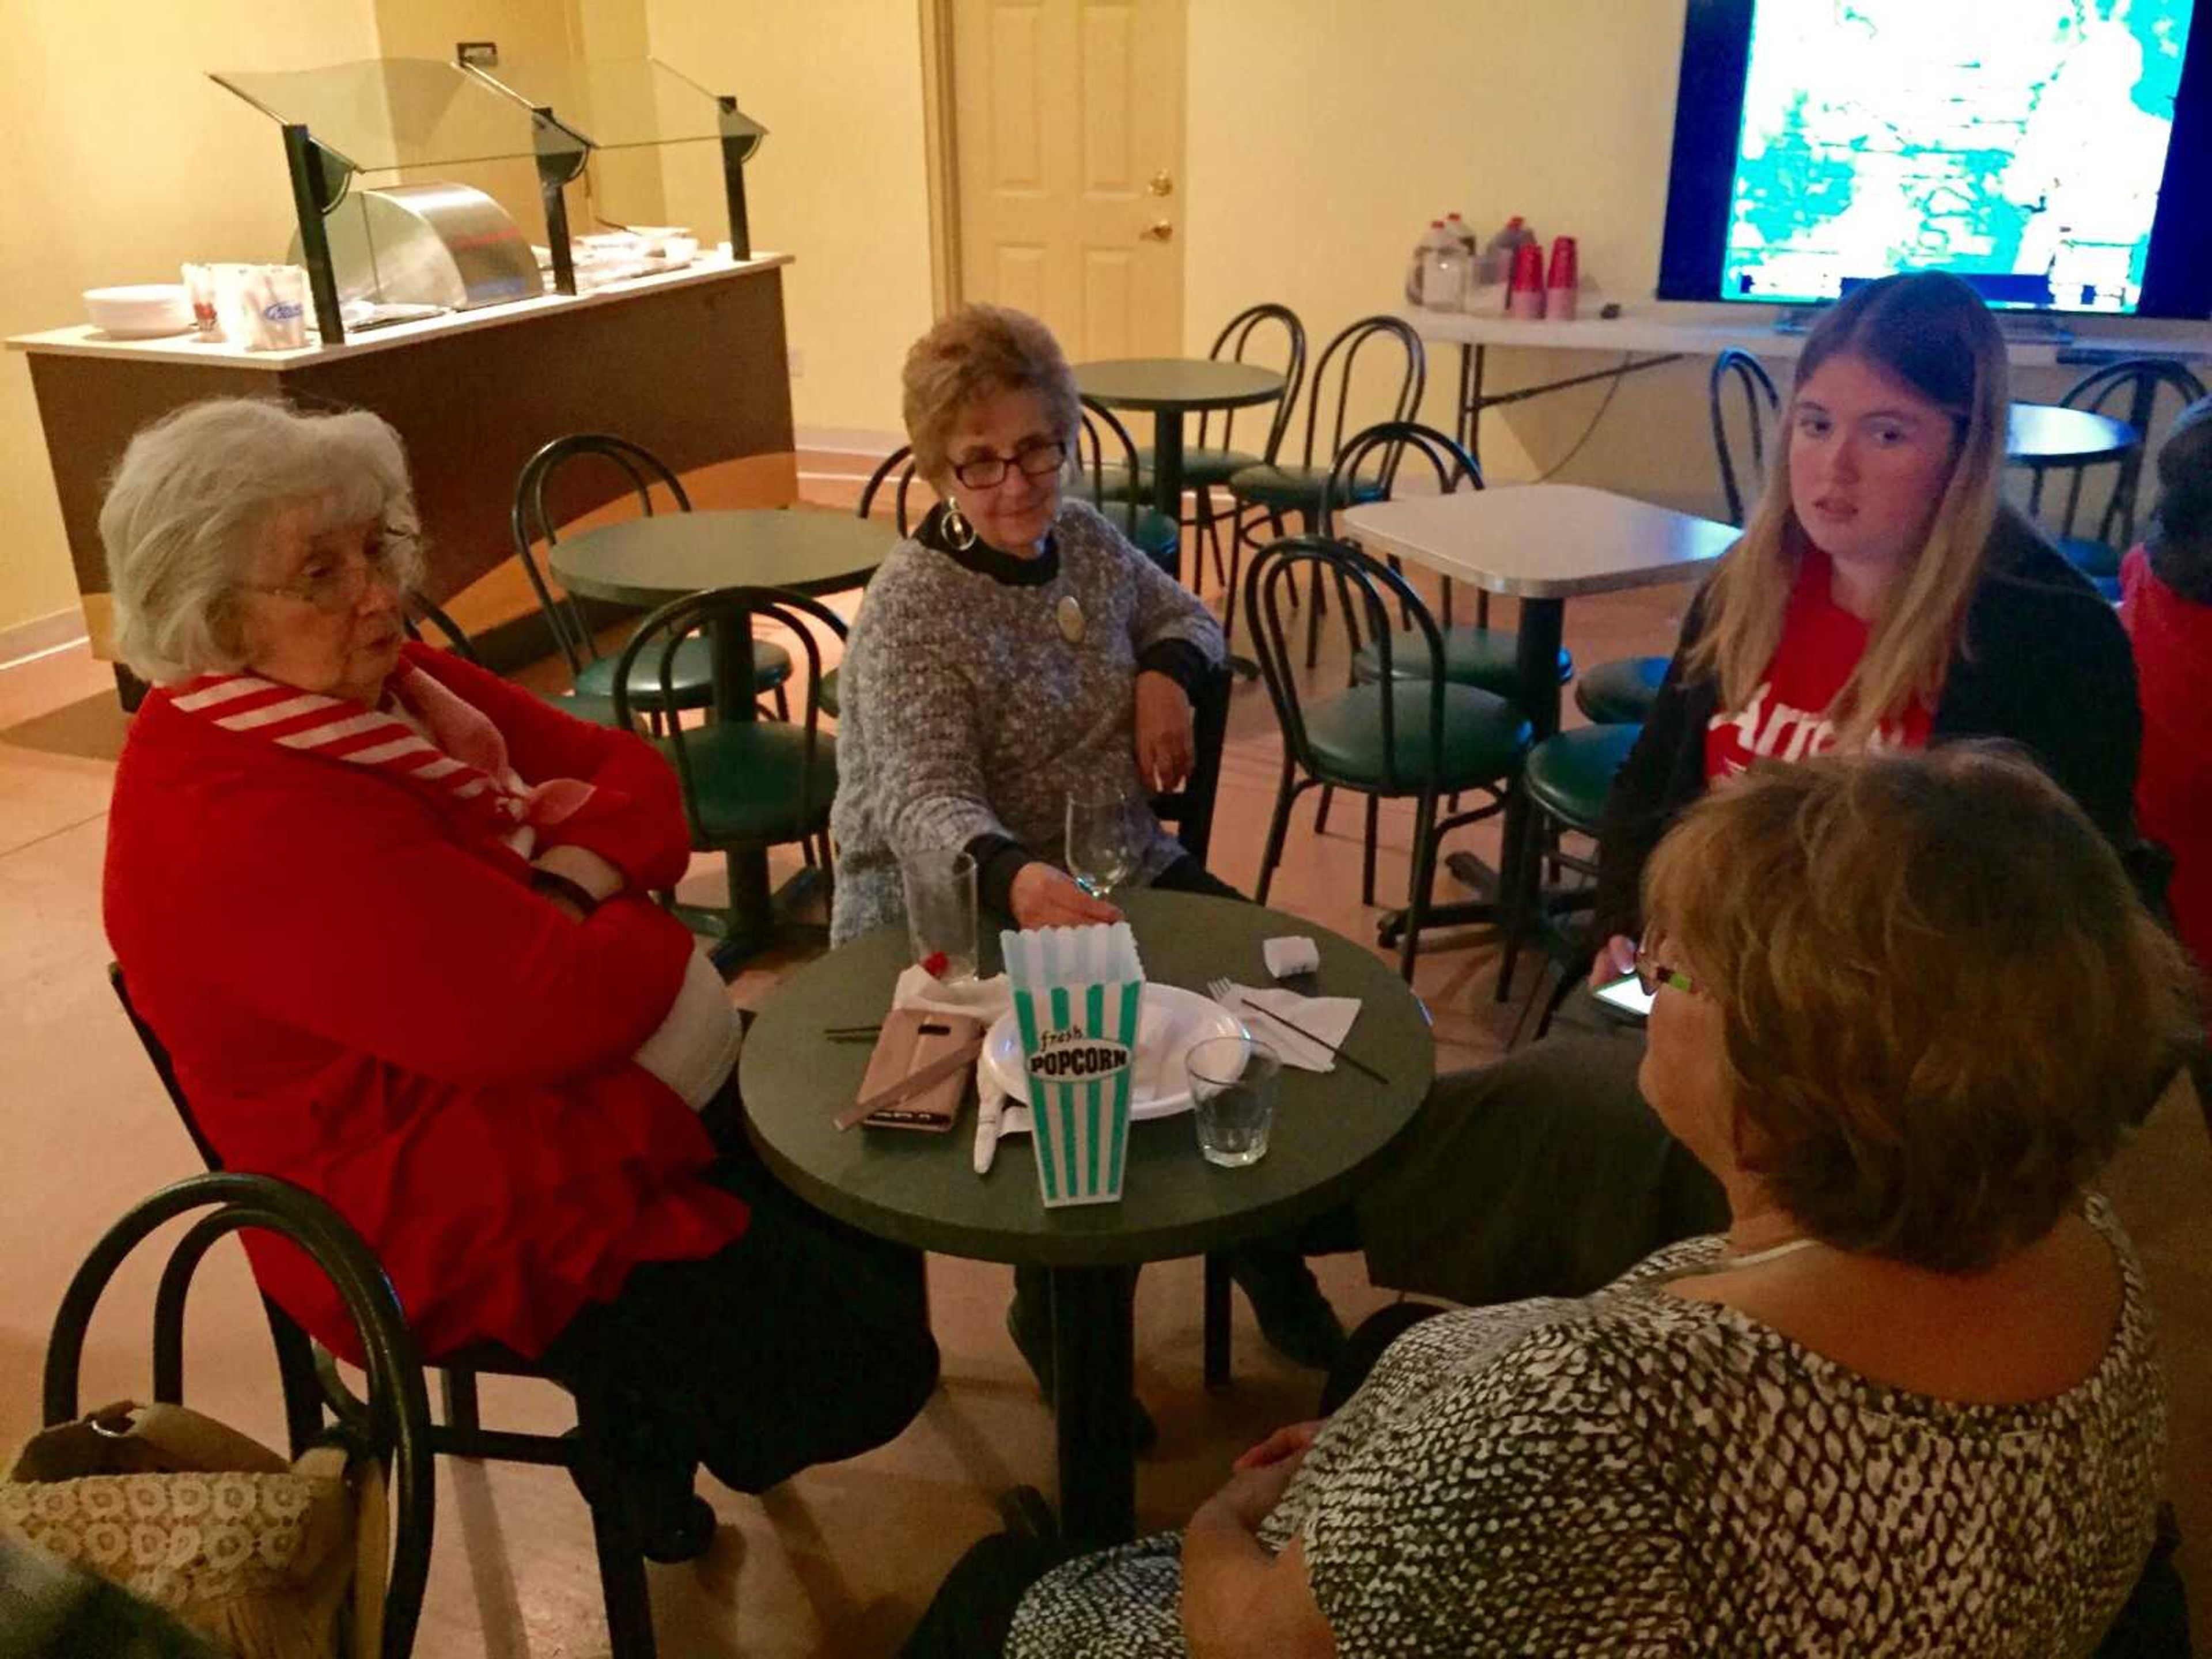 Women at the Democratic watch party discuss the nations issues.